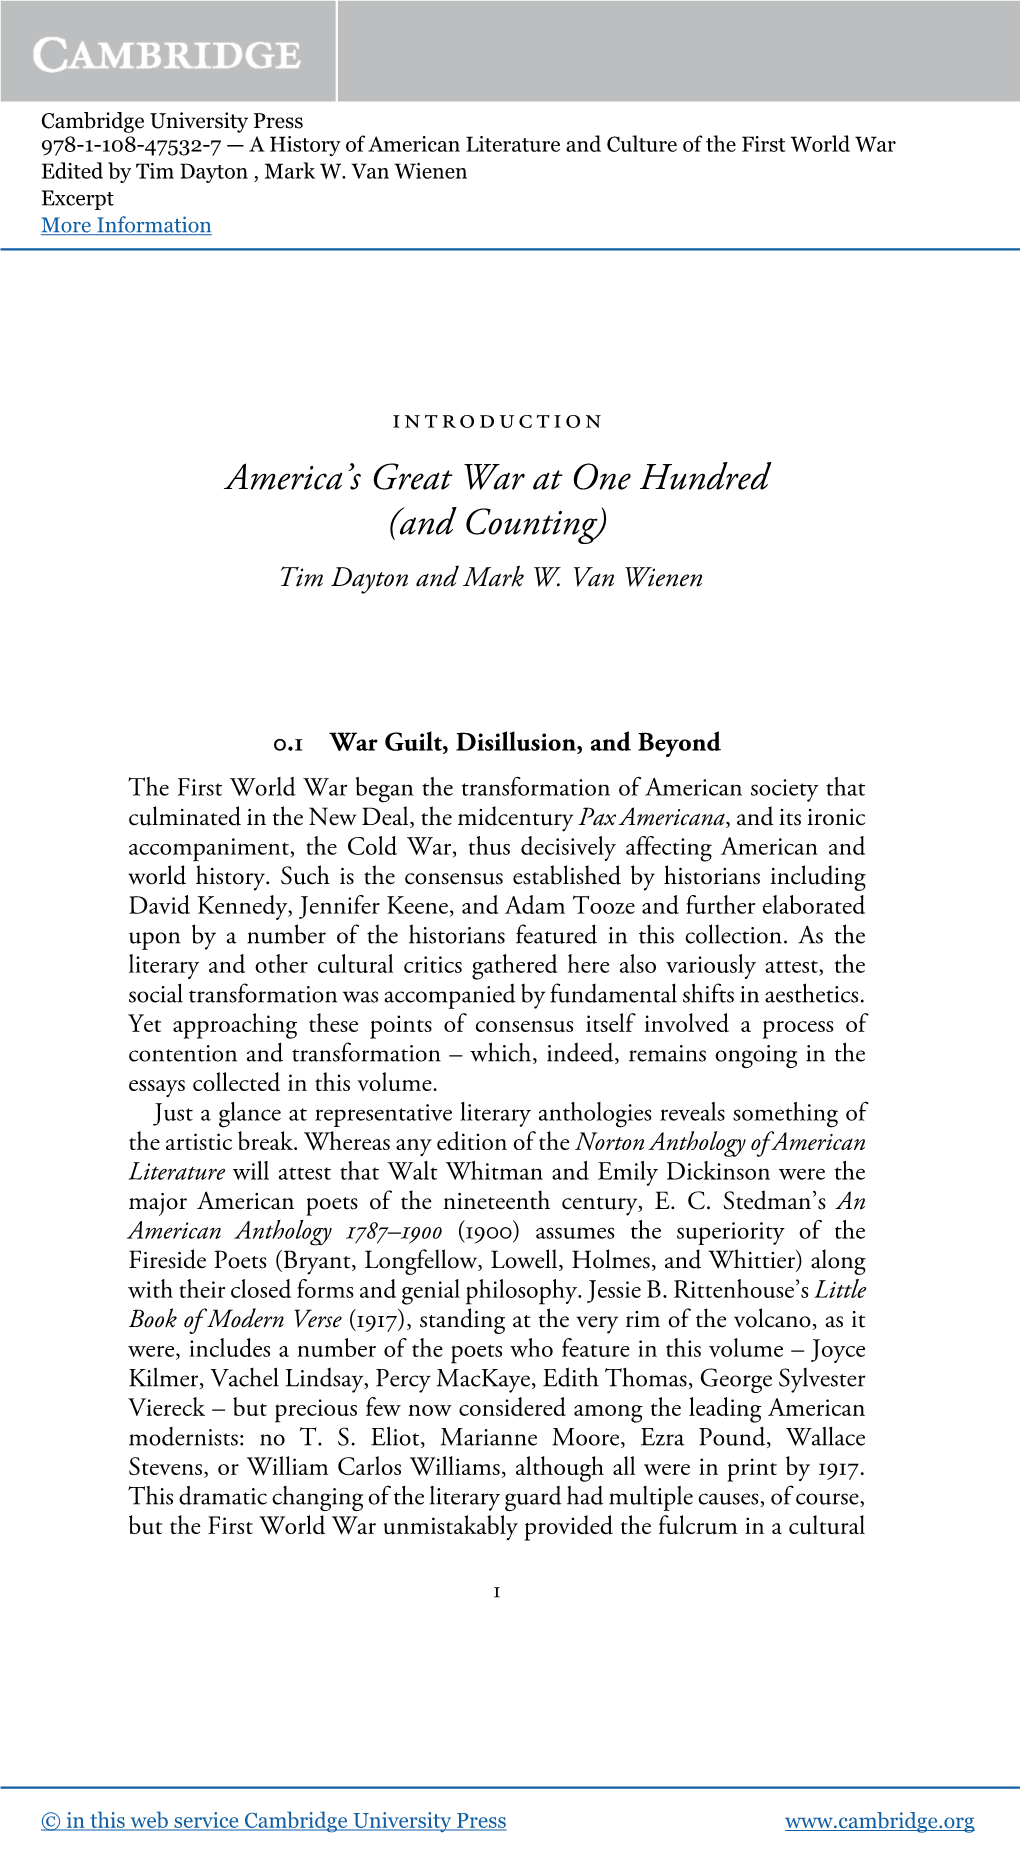 America's Great War at One Hundred